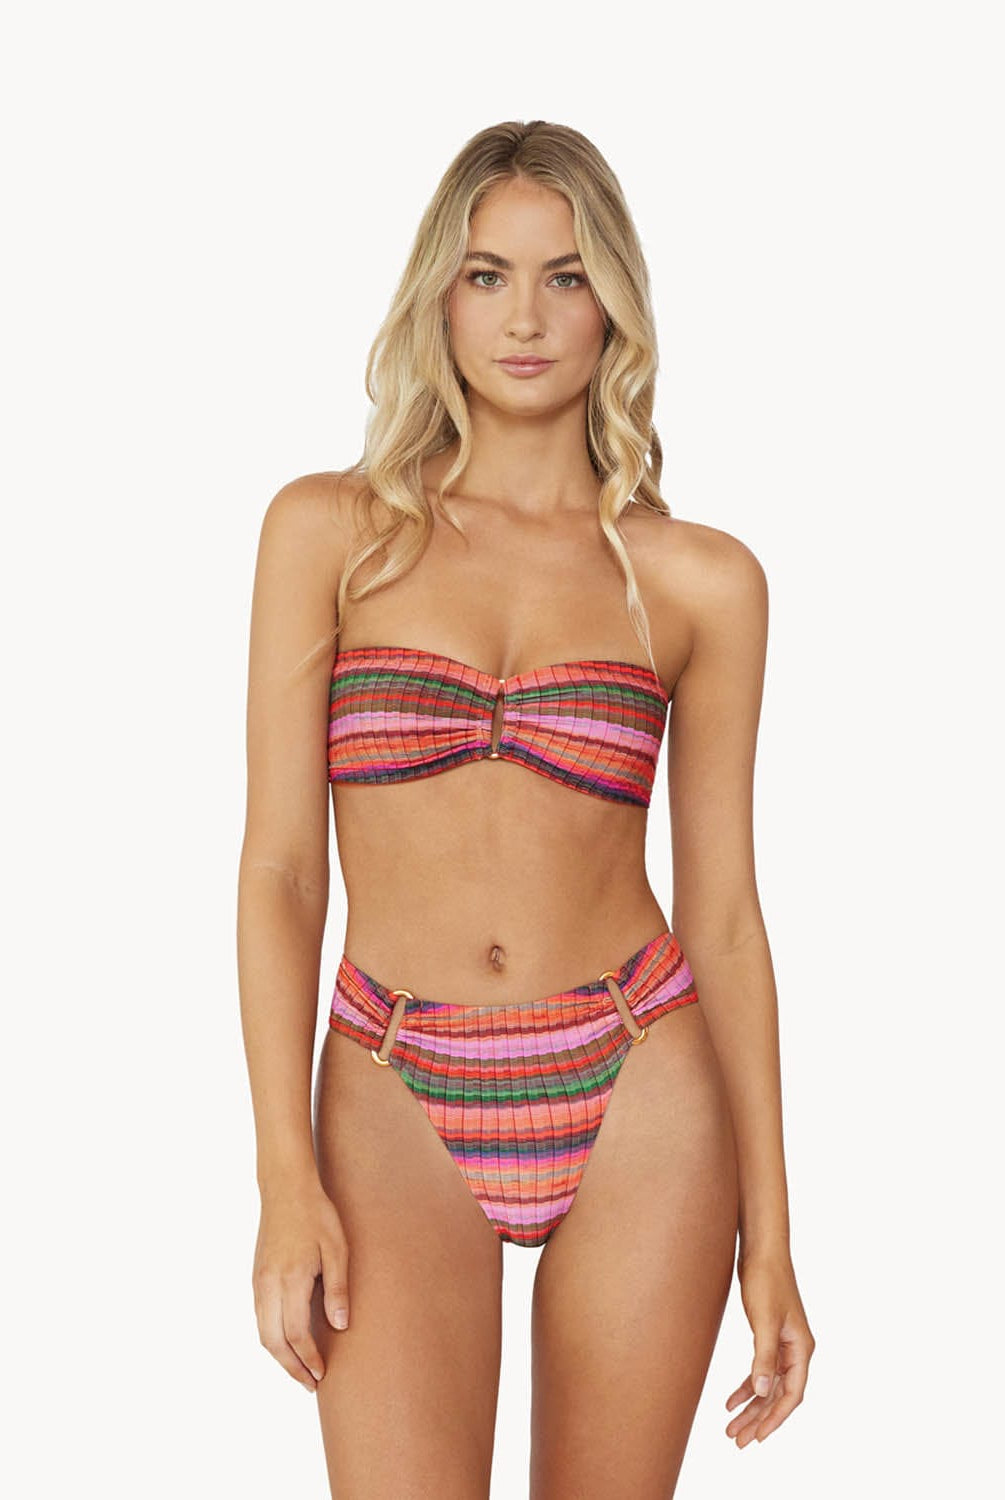 Blonde woman wearing a multi-colored stripe print bandeau bikini with gold details stands in front of white wall.